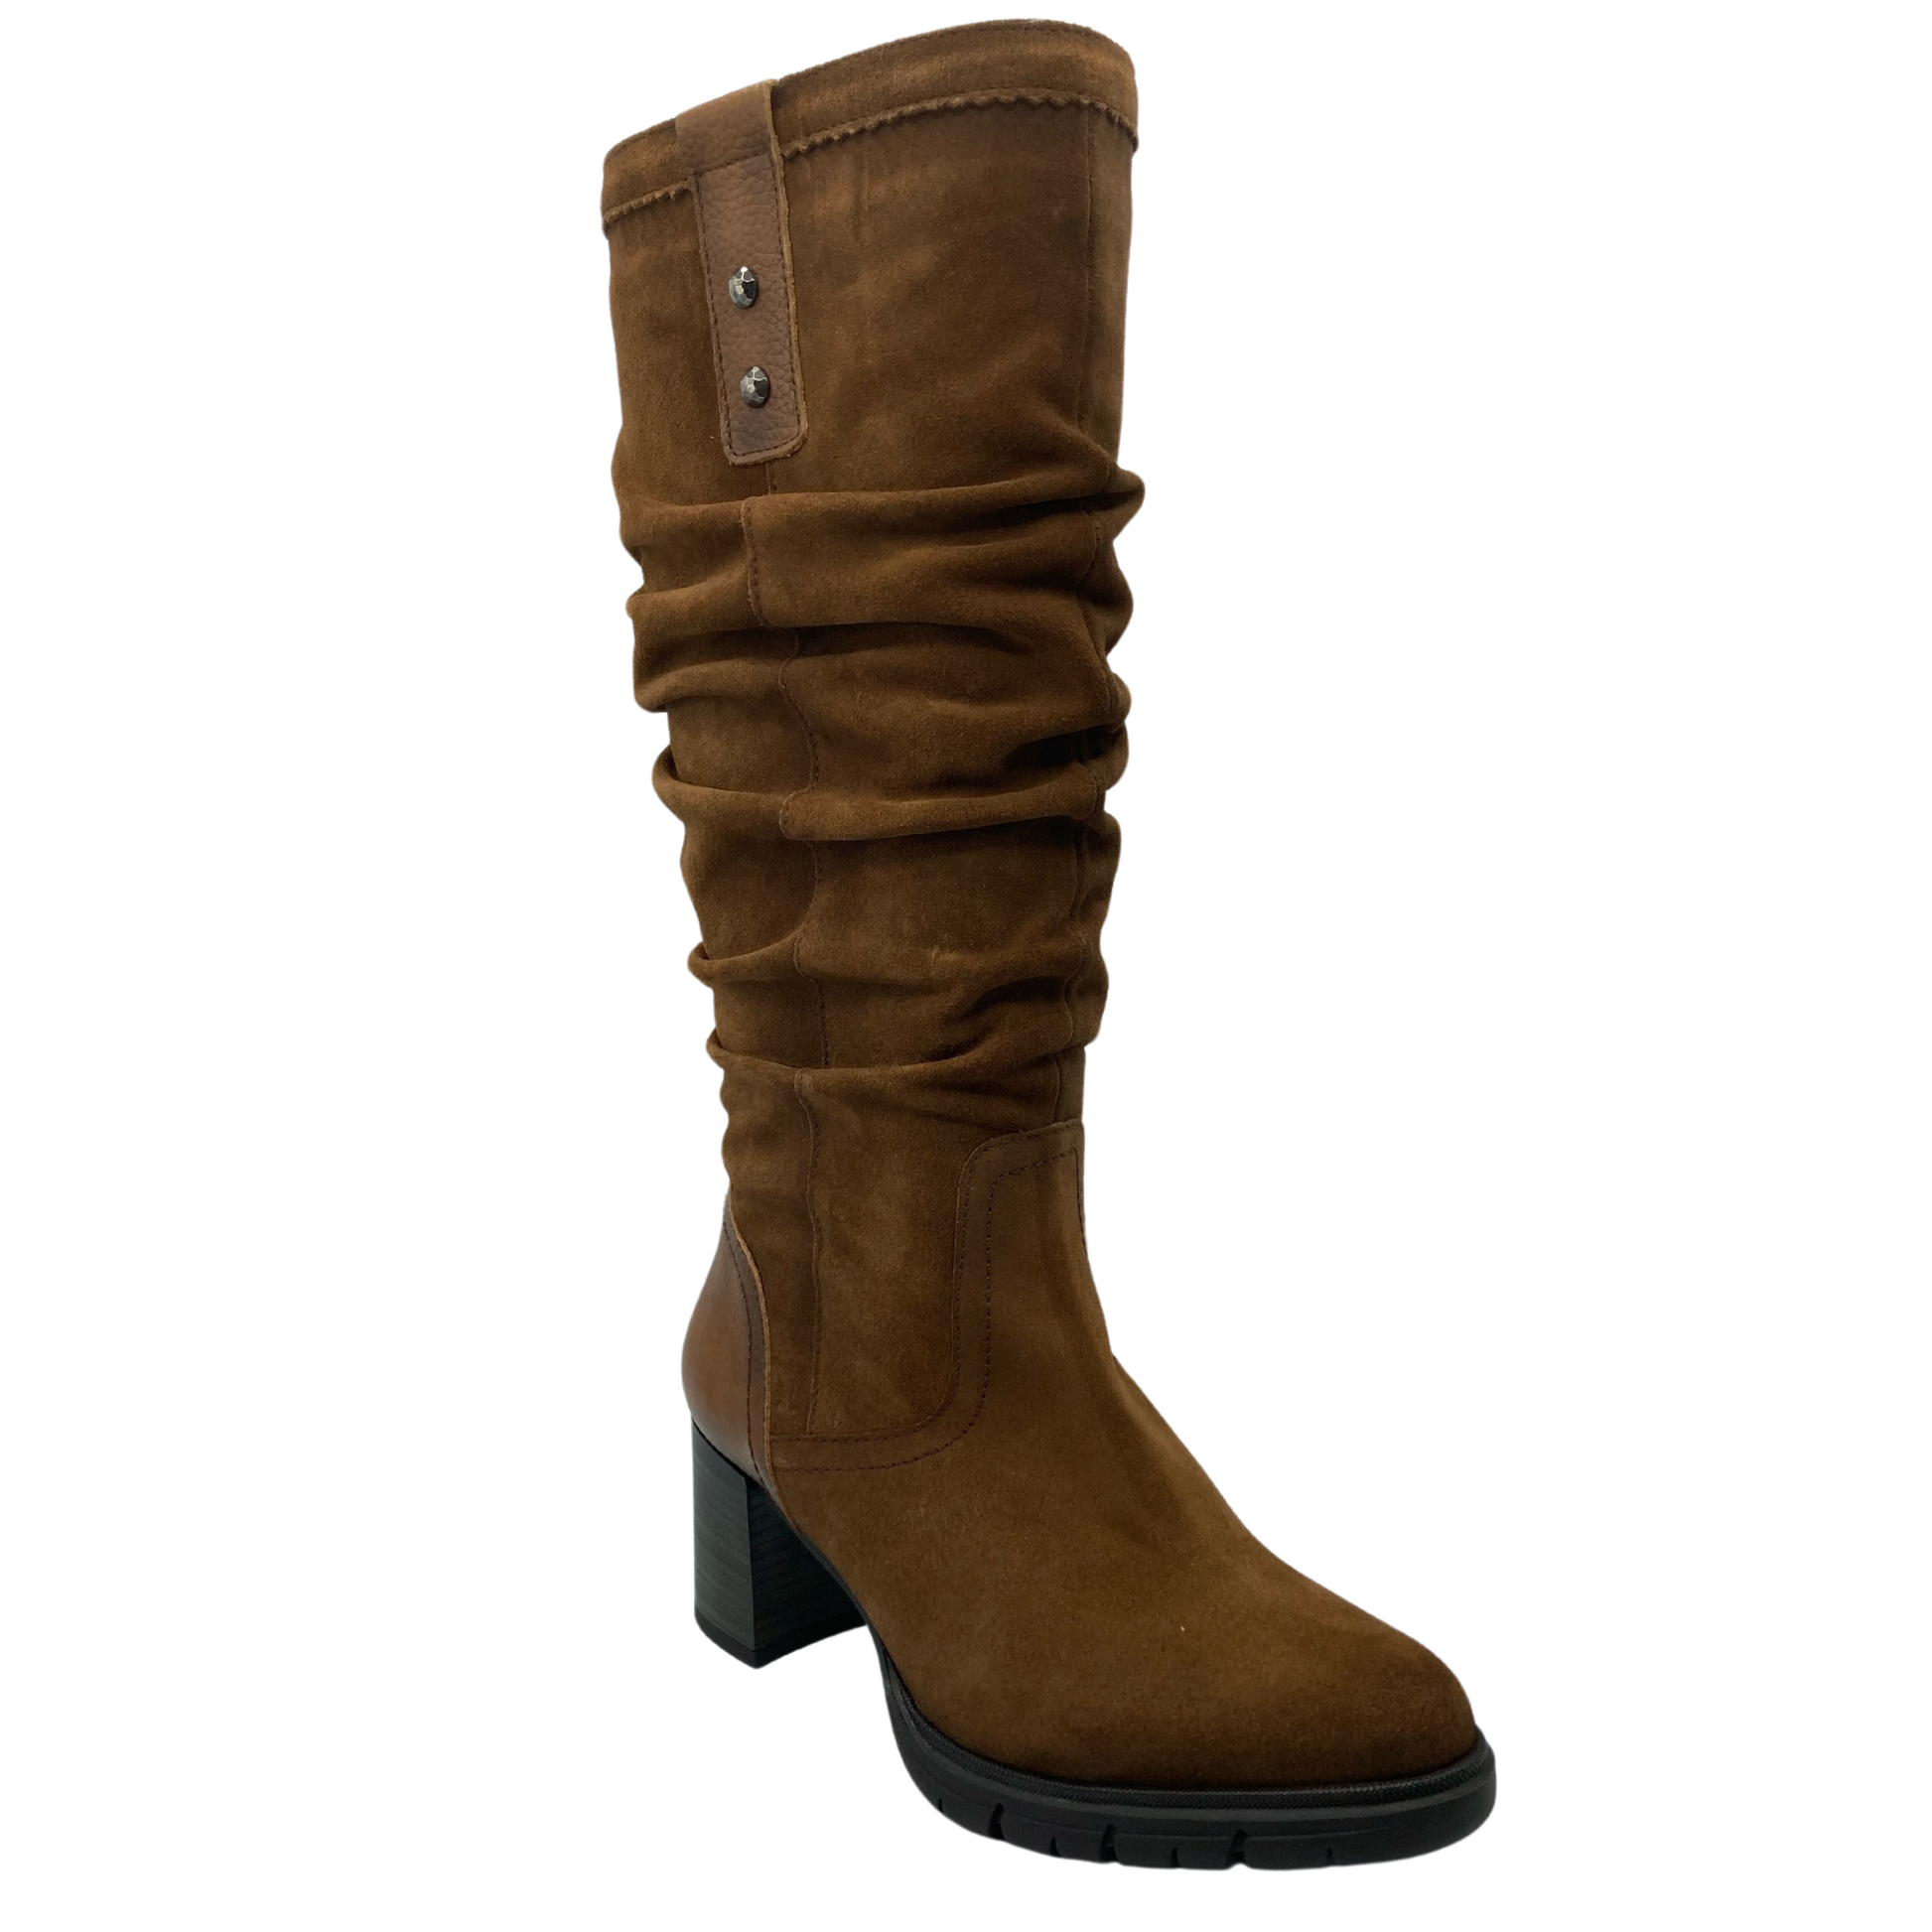 45 degree angled view of brown suede calf boot with 2 inch block heel